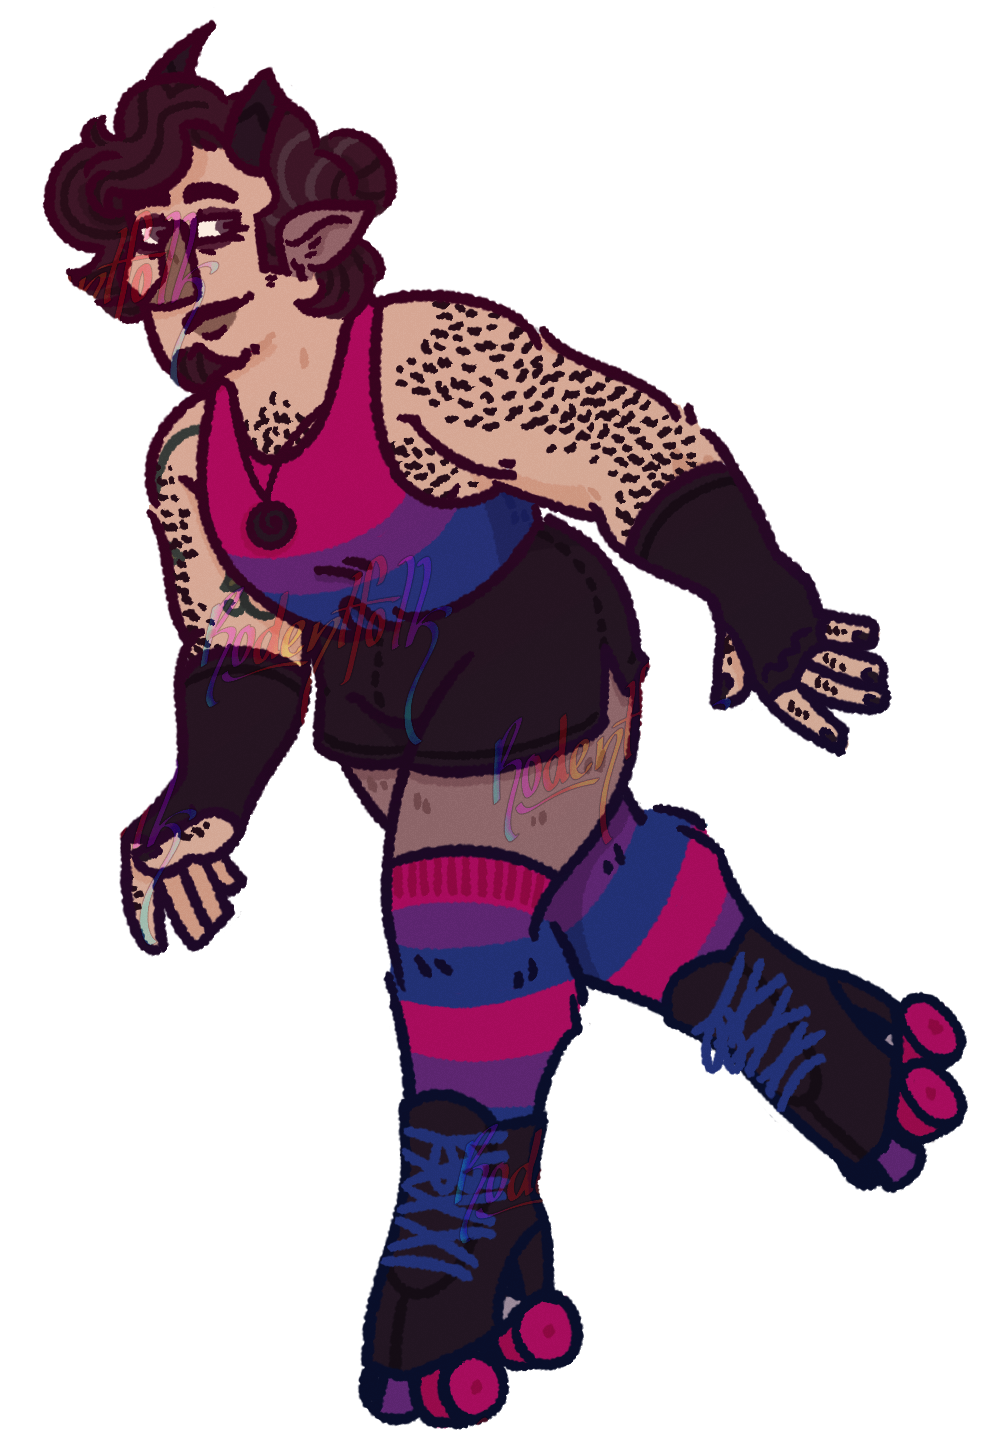 It is a drawing of Nik's OC, Monty. He has his hair up in a loose bun, with a Bisexual flag themed tank top, and matching socks. The shorts, skates, and added finger-less gloves are black, with the skates having accented colours of the Bisexual flag. He is also wearing a black pendant styled to be a Koru (A Māori design of a circular swirl) and has painted his nails black.